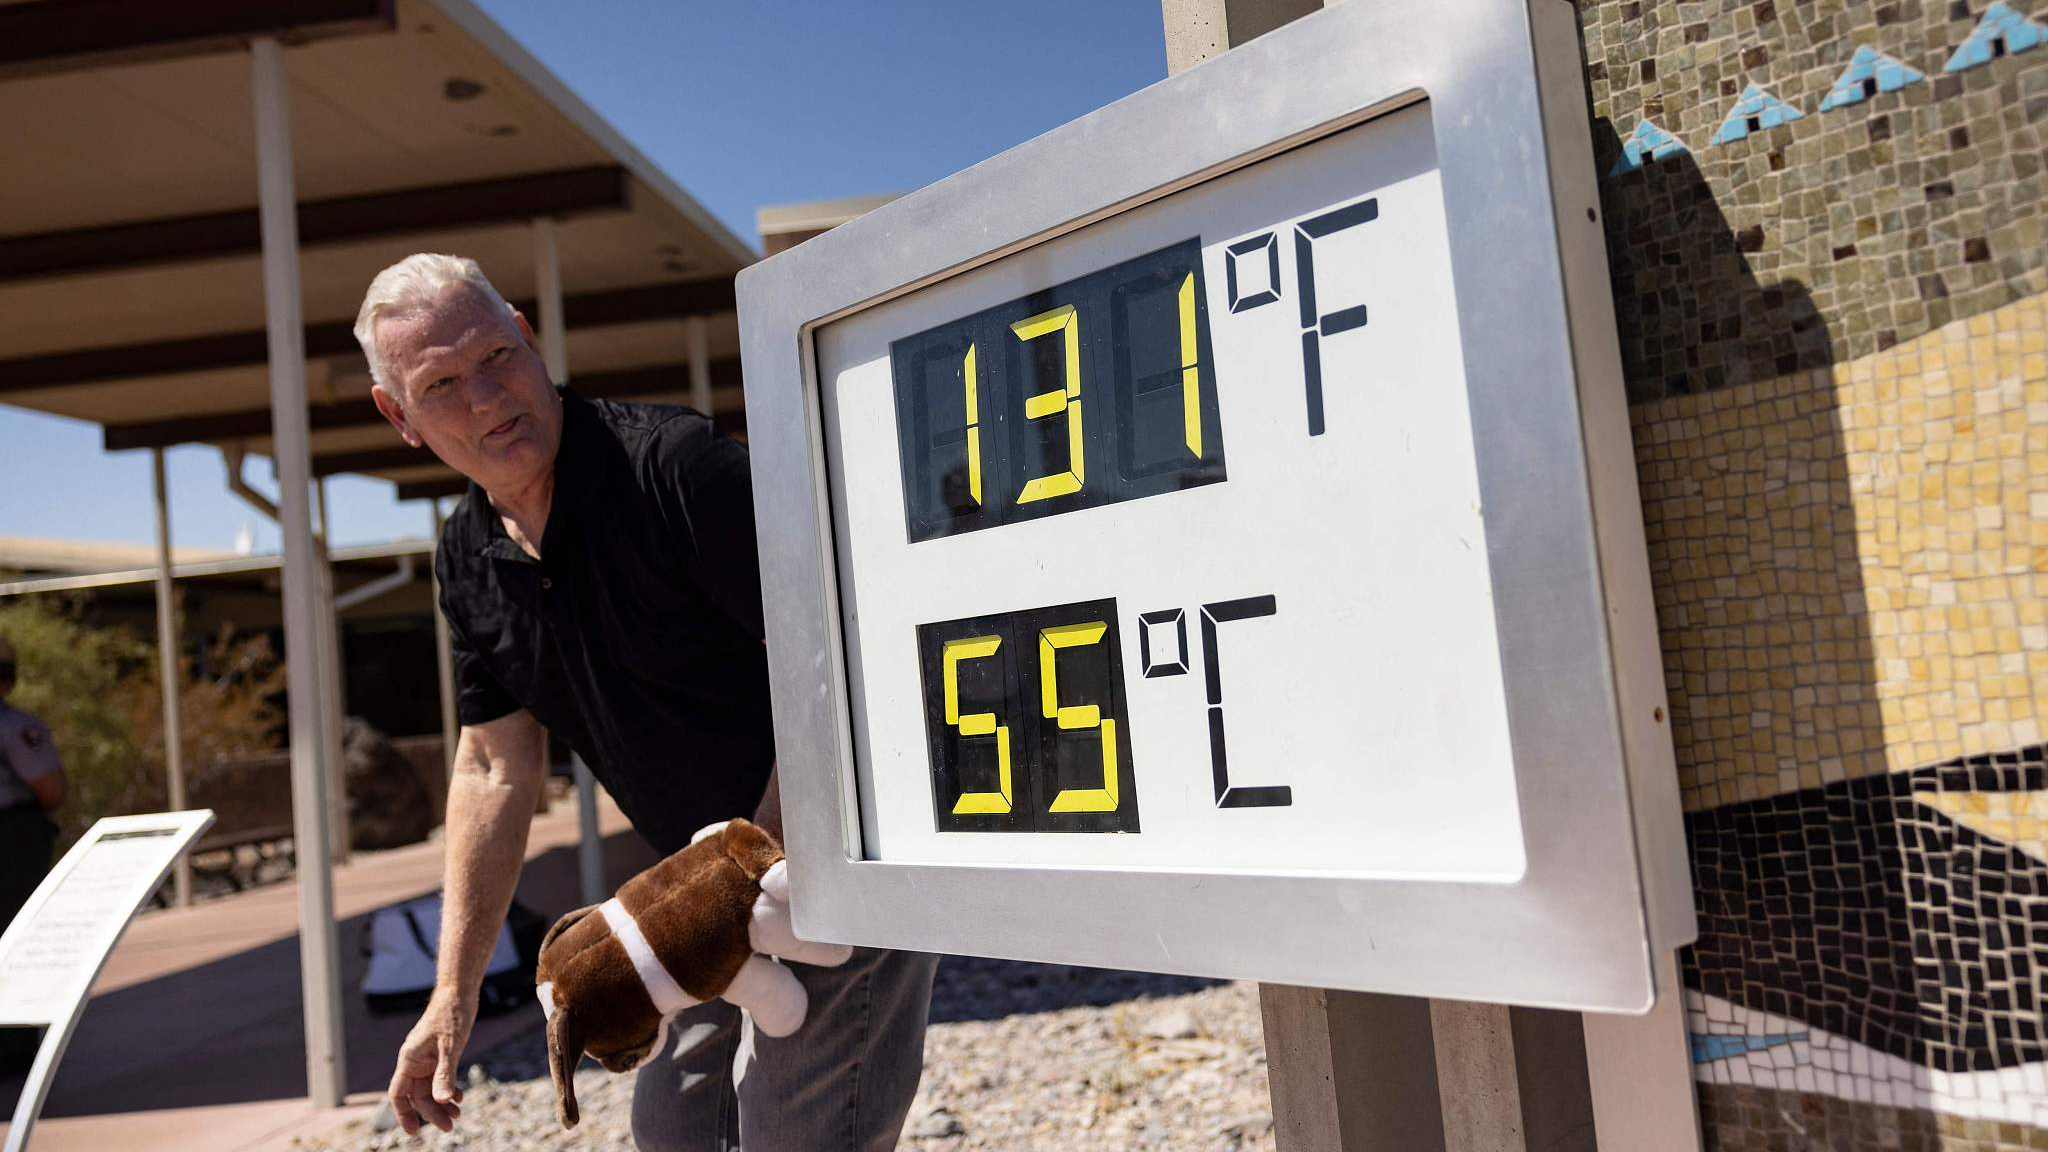 A visitor reacts as he poses next to a thermometer reading 